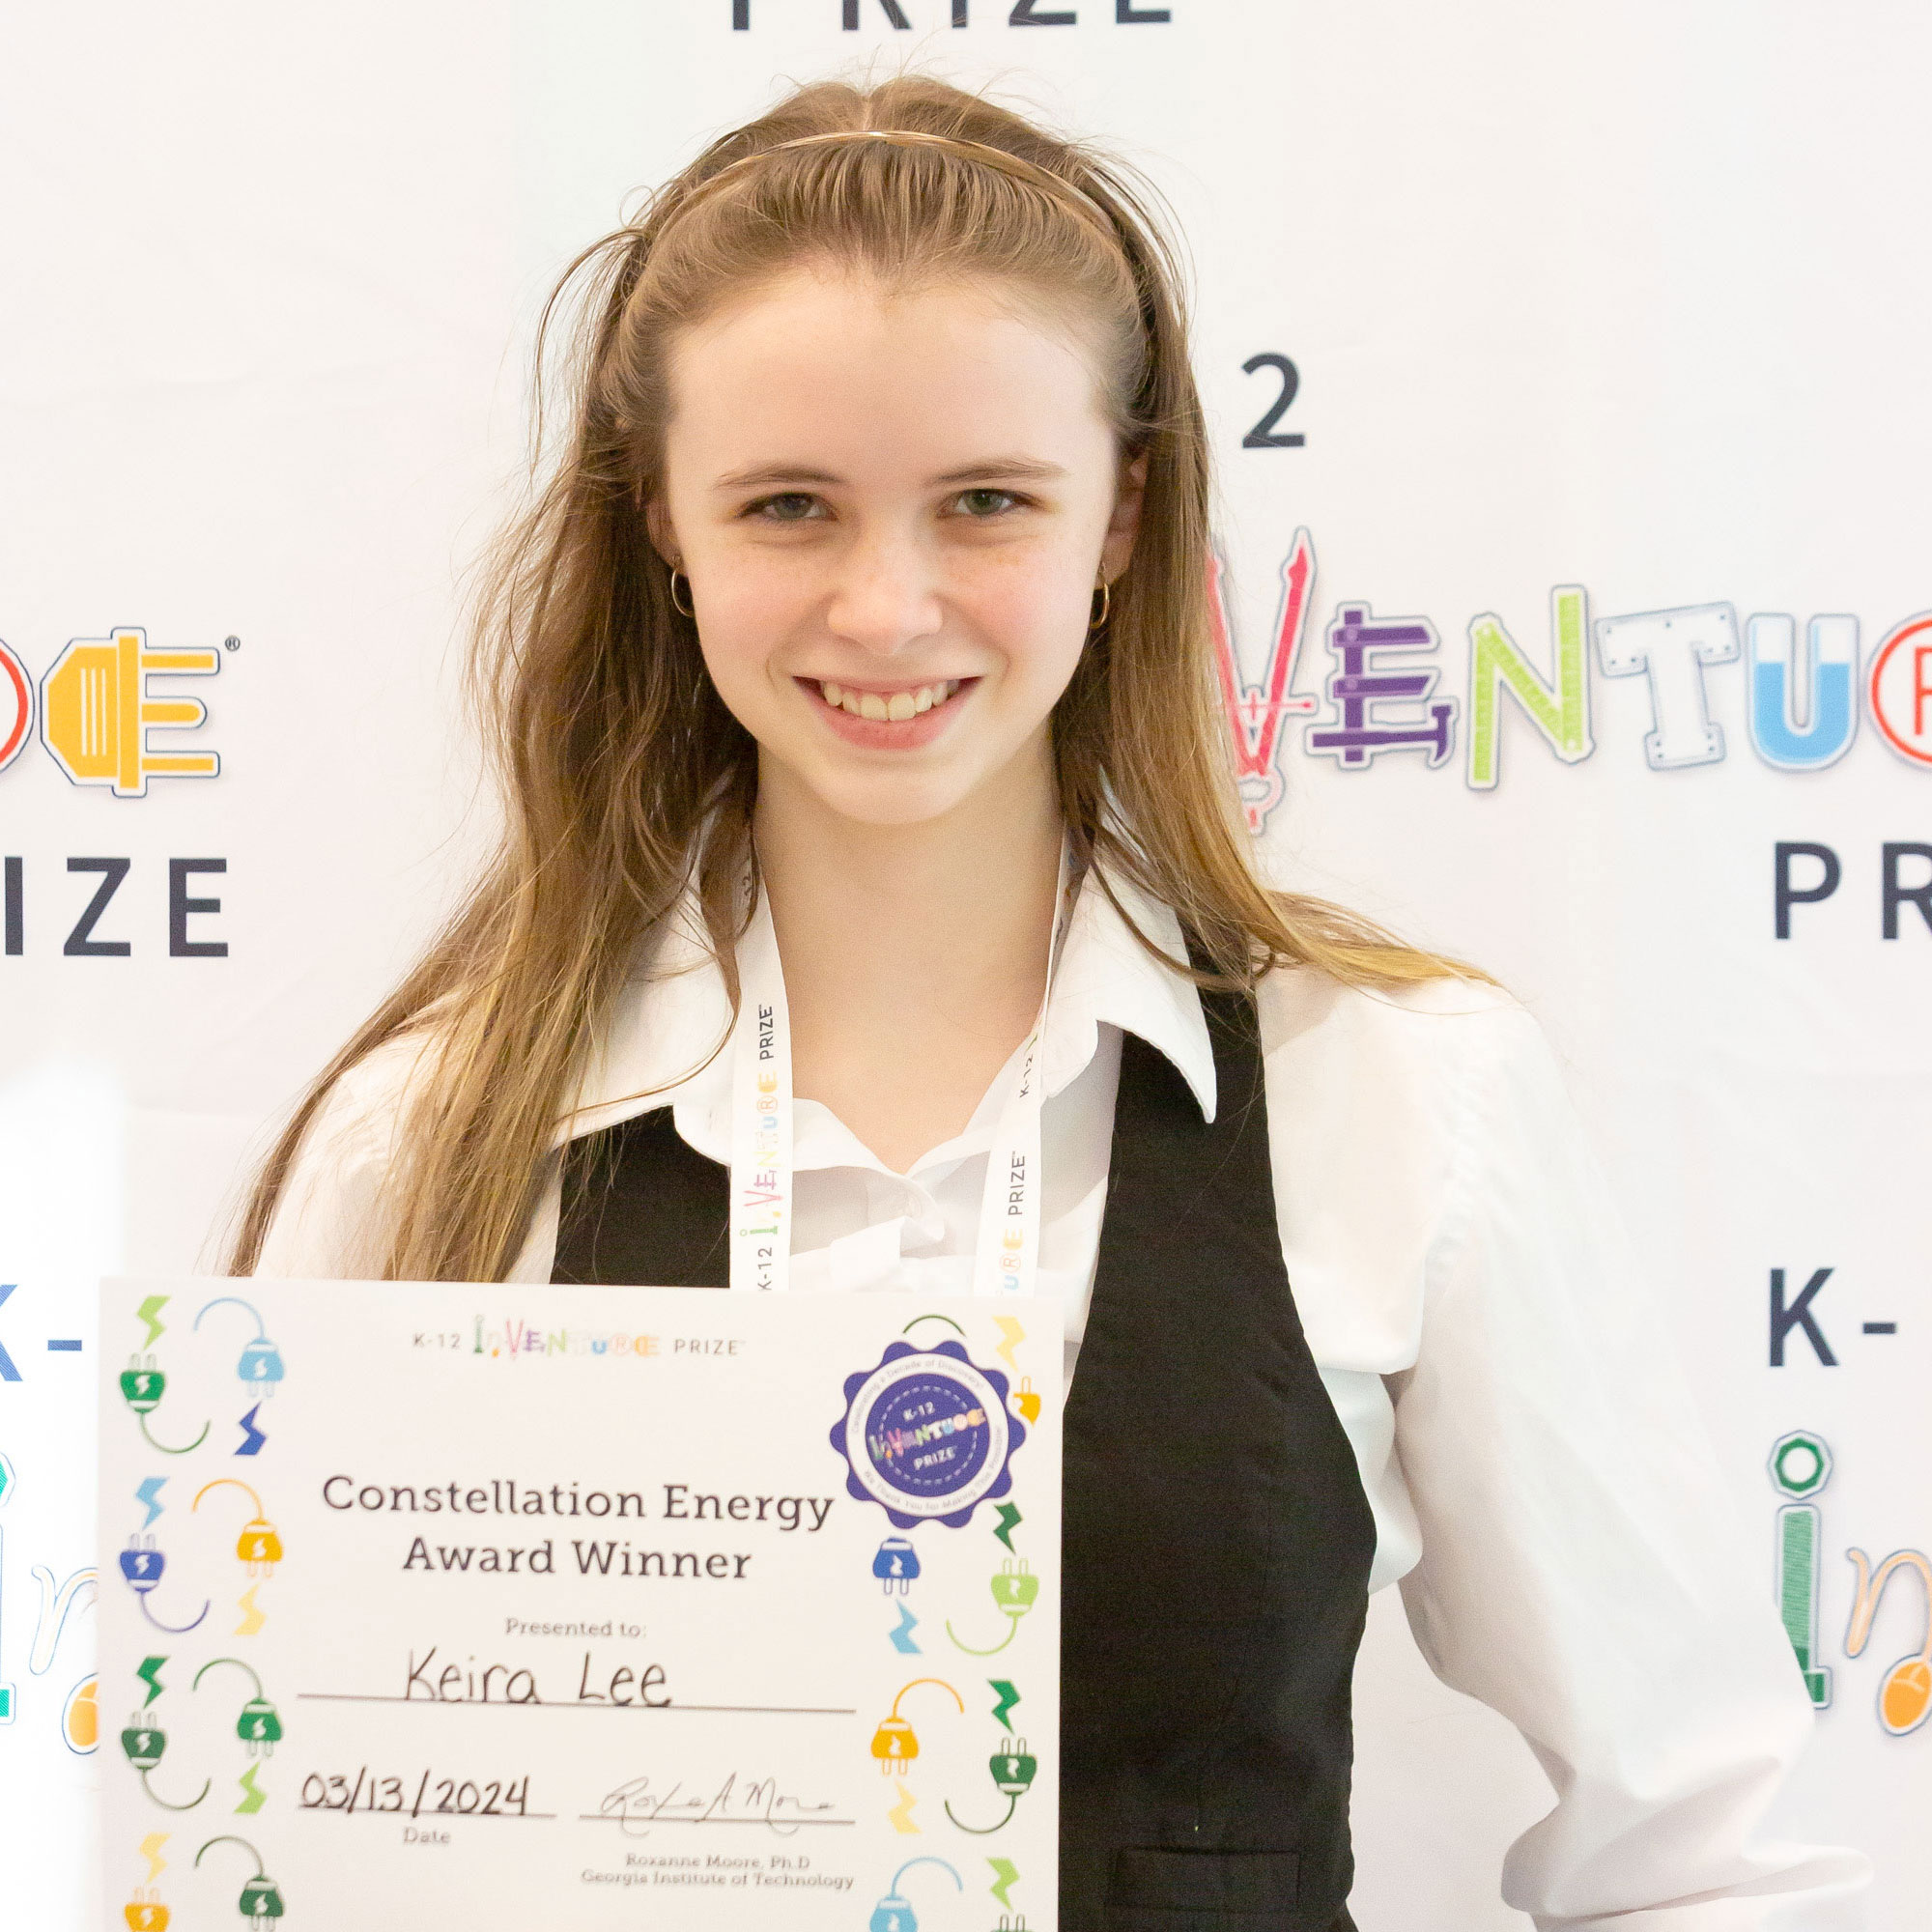 A smiling student holding a certificate